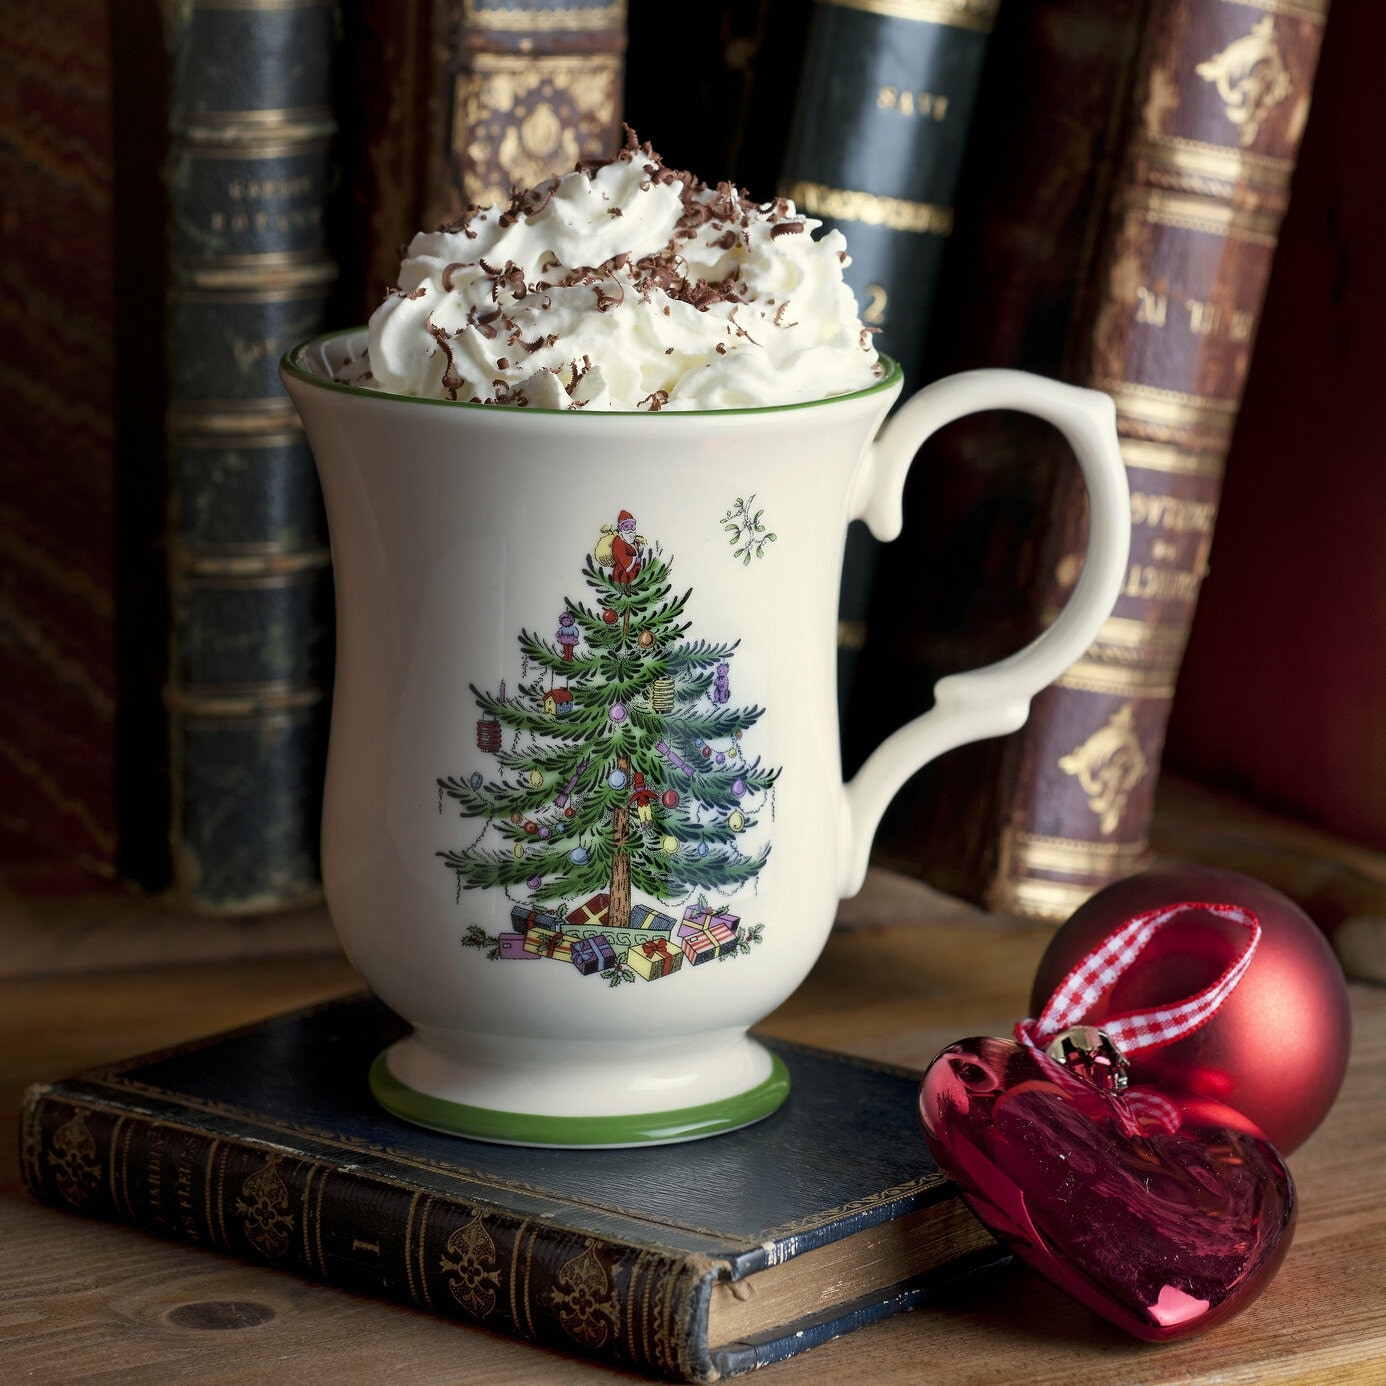 https://ak1.ostkcdn.com/images/products/is/images/direct/f63a3fe885ef8add581d42abe1cd04e654349d6c/Spode-Christmas-Tree-Romantic-Shape-Footed-Mug.jpg